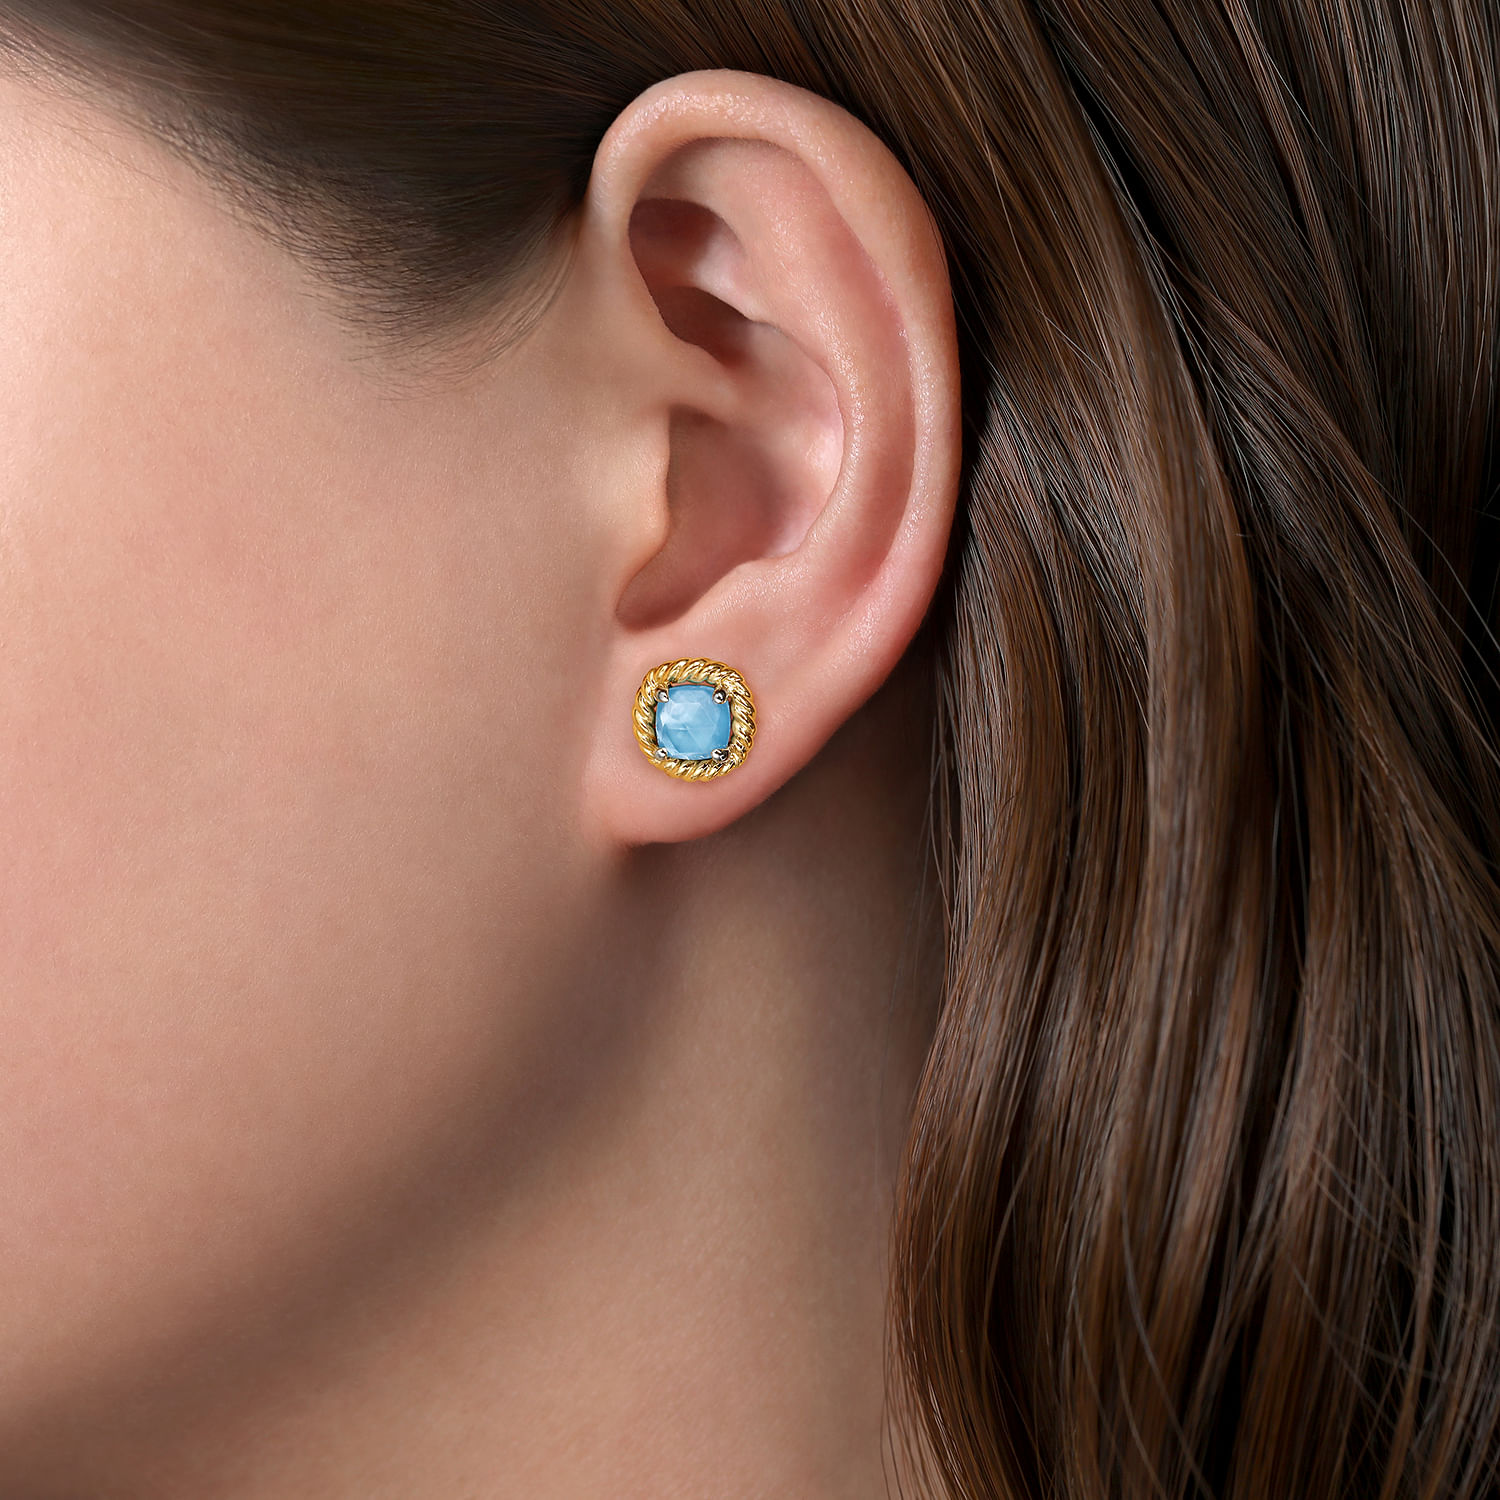 14K Yellow Gold Rock Crystal/White MOP/Turquoise Stud Earrings